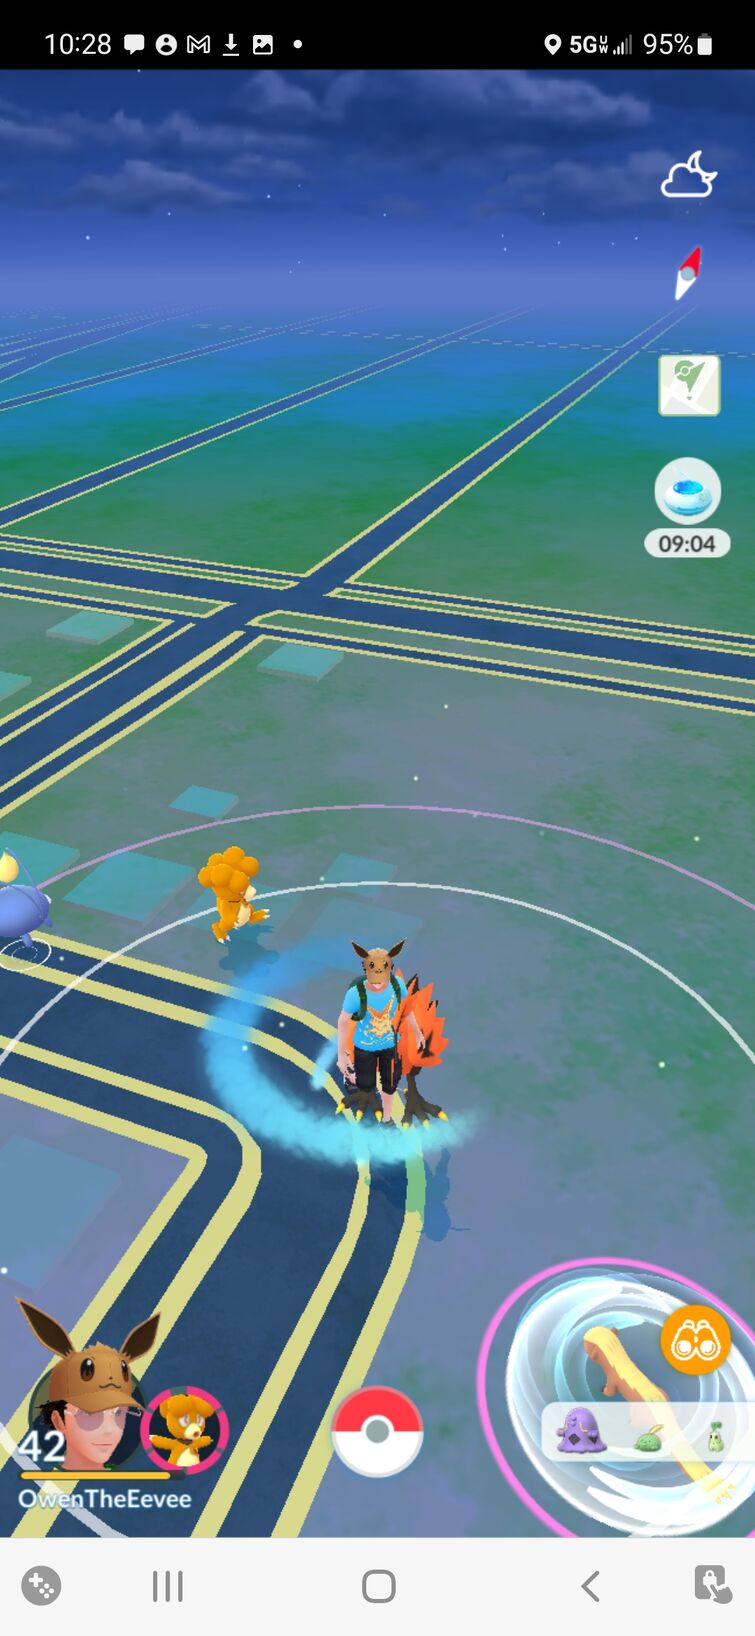 How to Get Galarian Zapdos in Pokemon GO